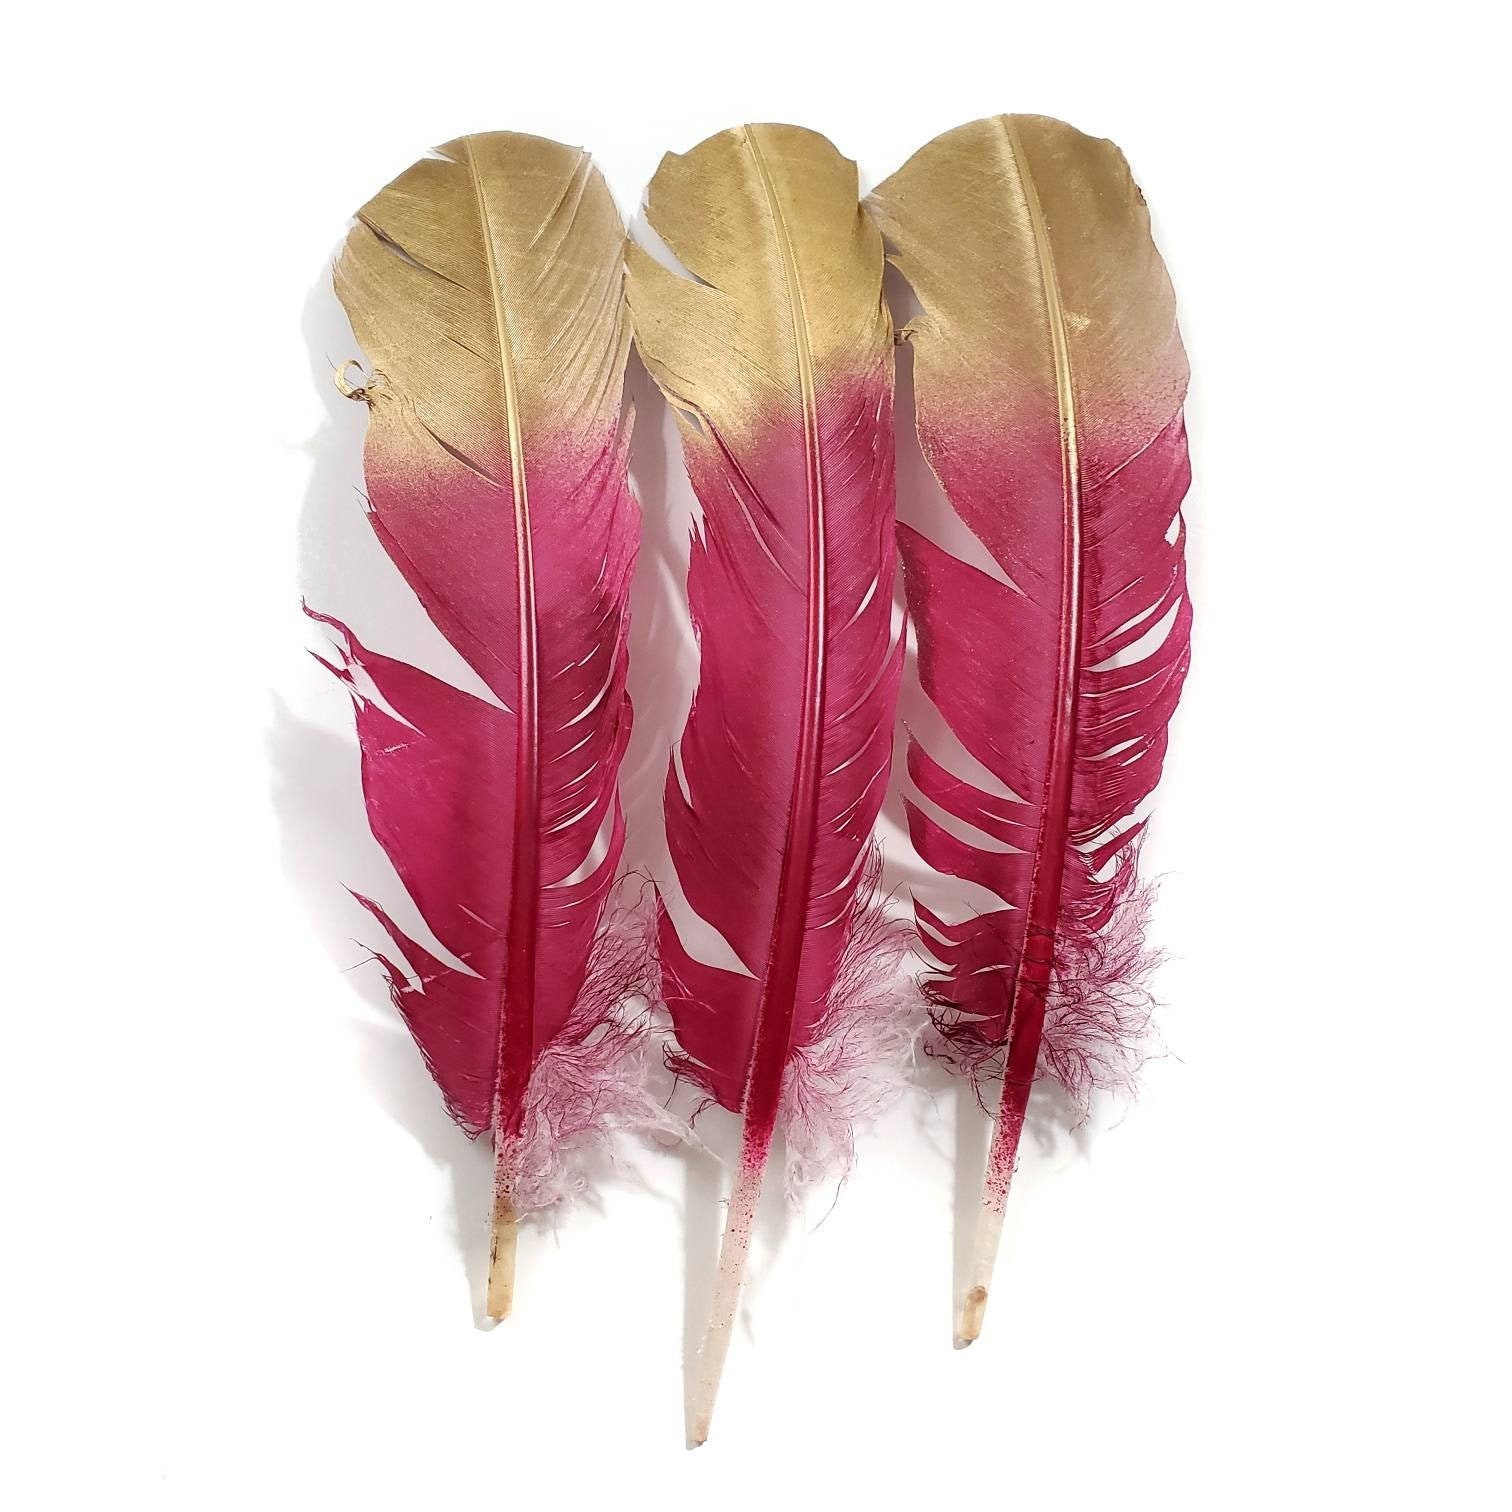 Wild Feathers, 50 Pieces Natural Barred Wild Turkey Merriam Primary Wing  Pointer Quill Wholesale Feathers bulk : 3441 